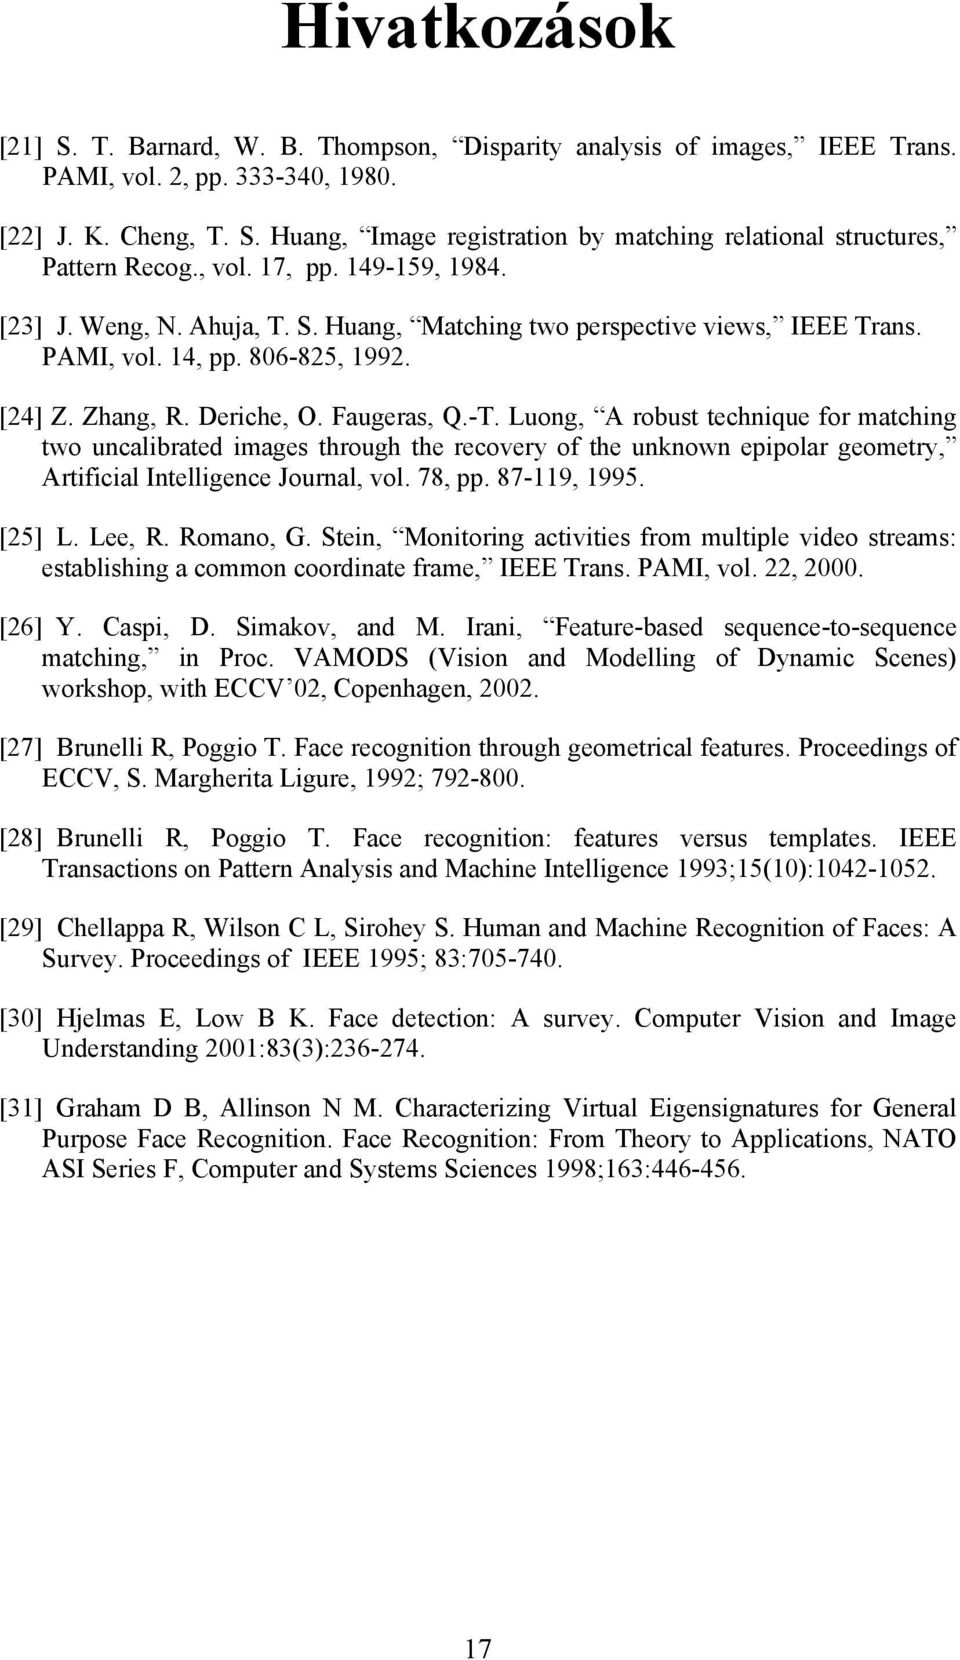 Luong, A robust technique for matching two uncalibrated images through the recovery of the unknown epipolar geometry, Artificial Intelligence Journal, vol. 78, pp. 87-119, 1995. [25] L. Lee, R.